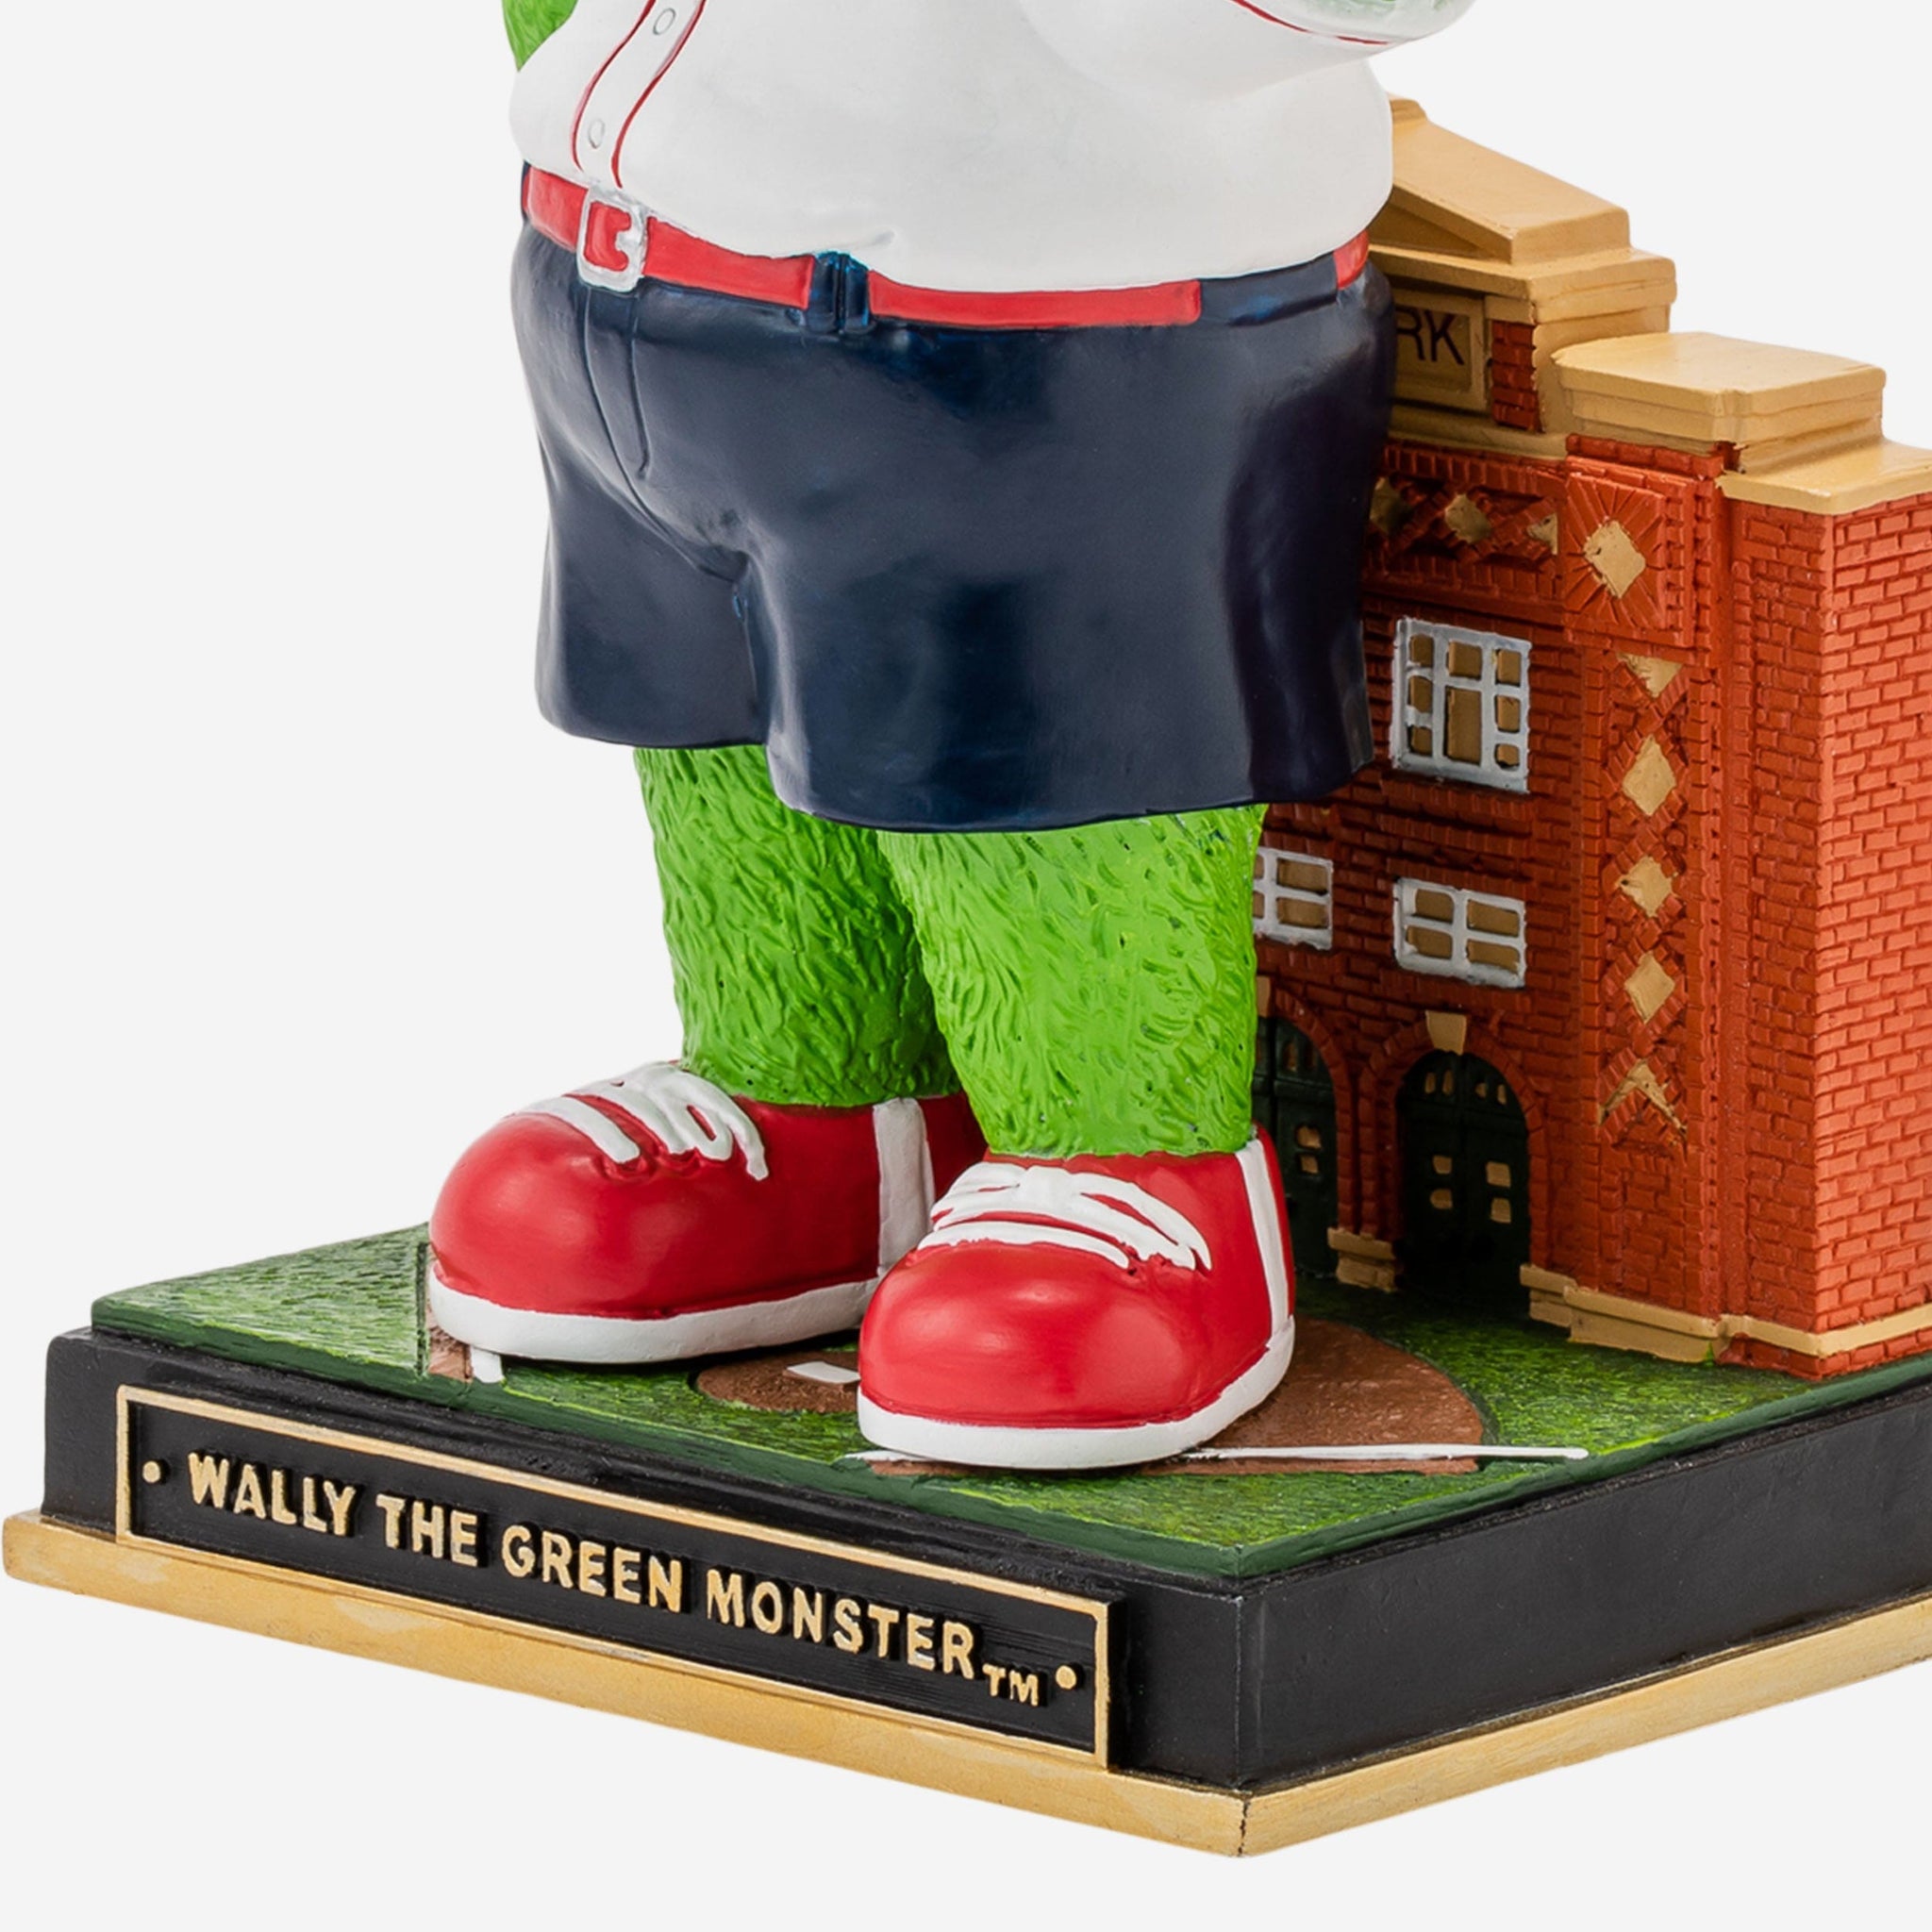 7' MLB Boston Red Sox Wally The Green Monster Mascot by Gemmy Inflatables